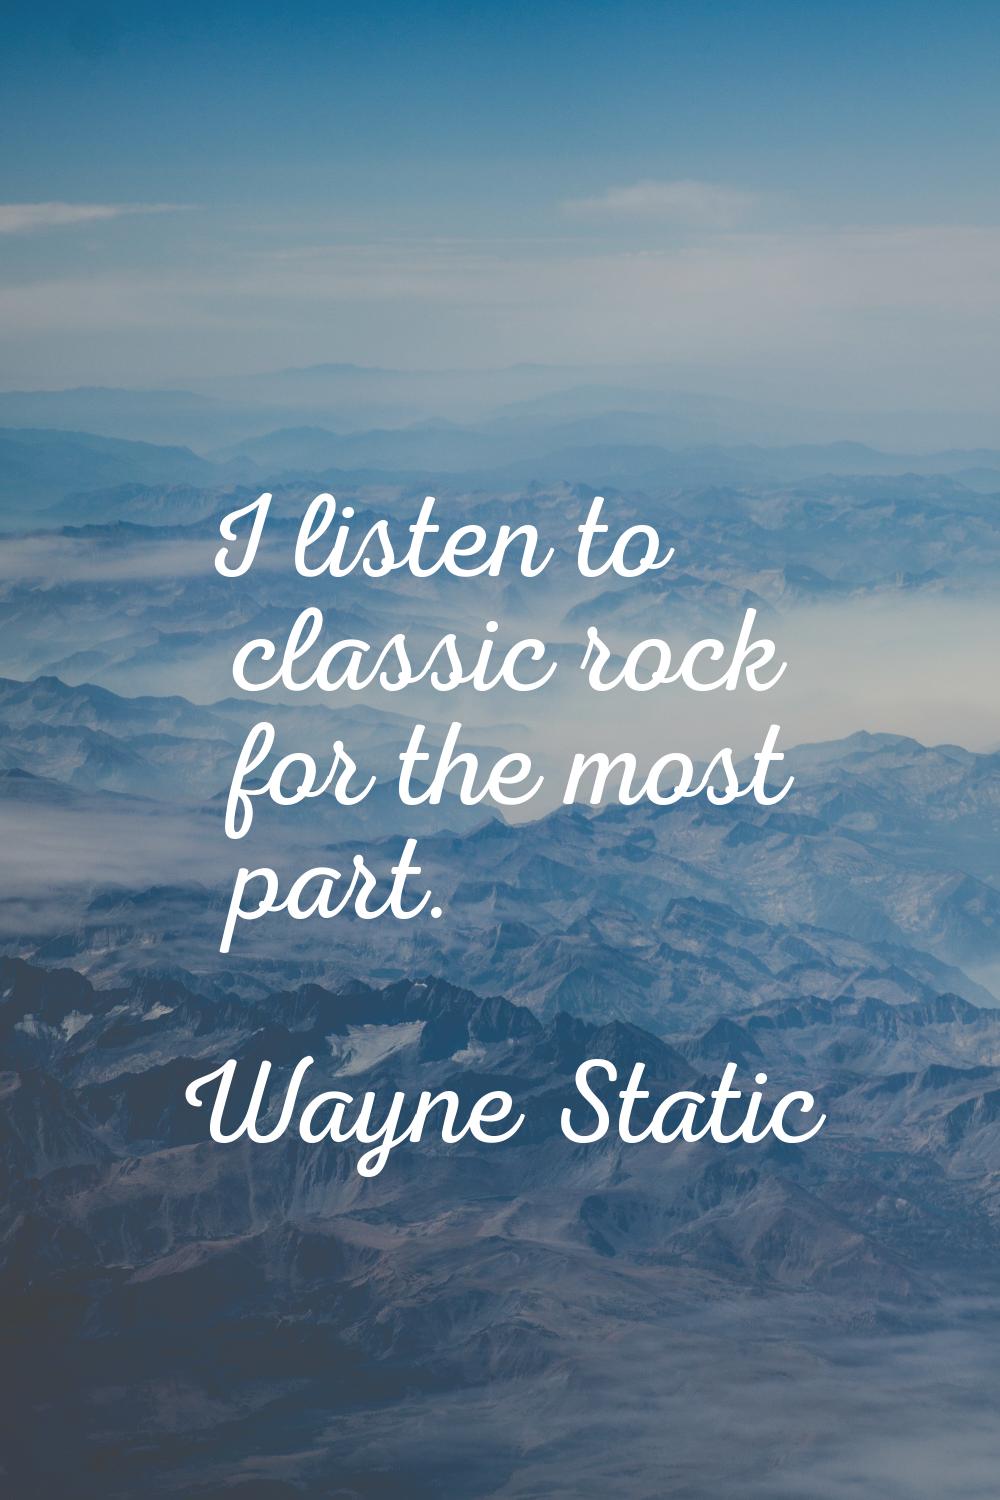 I listen to classic rock for the most part.